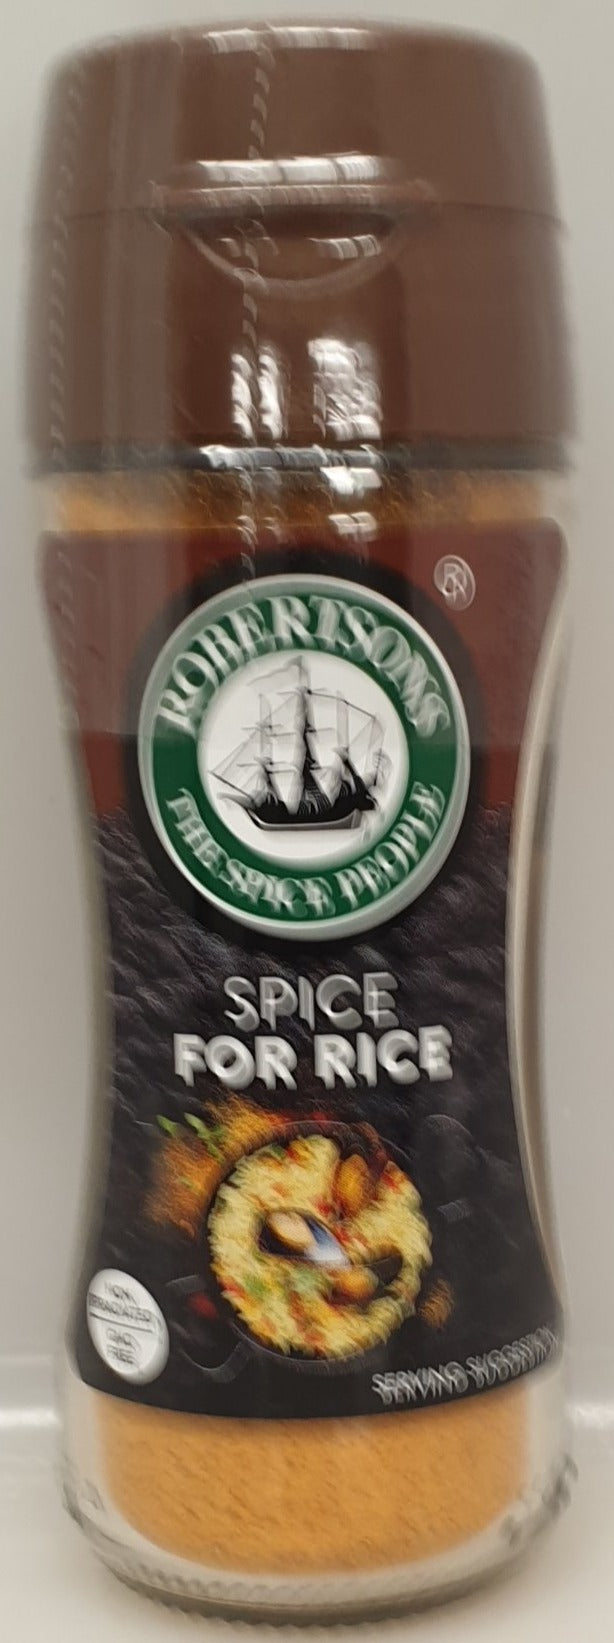 Robertsons Spice for Rice 85g